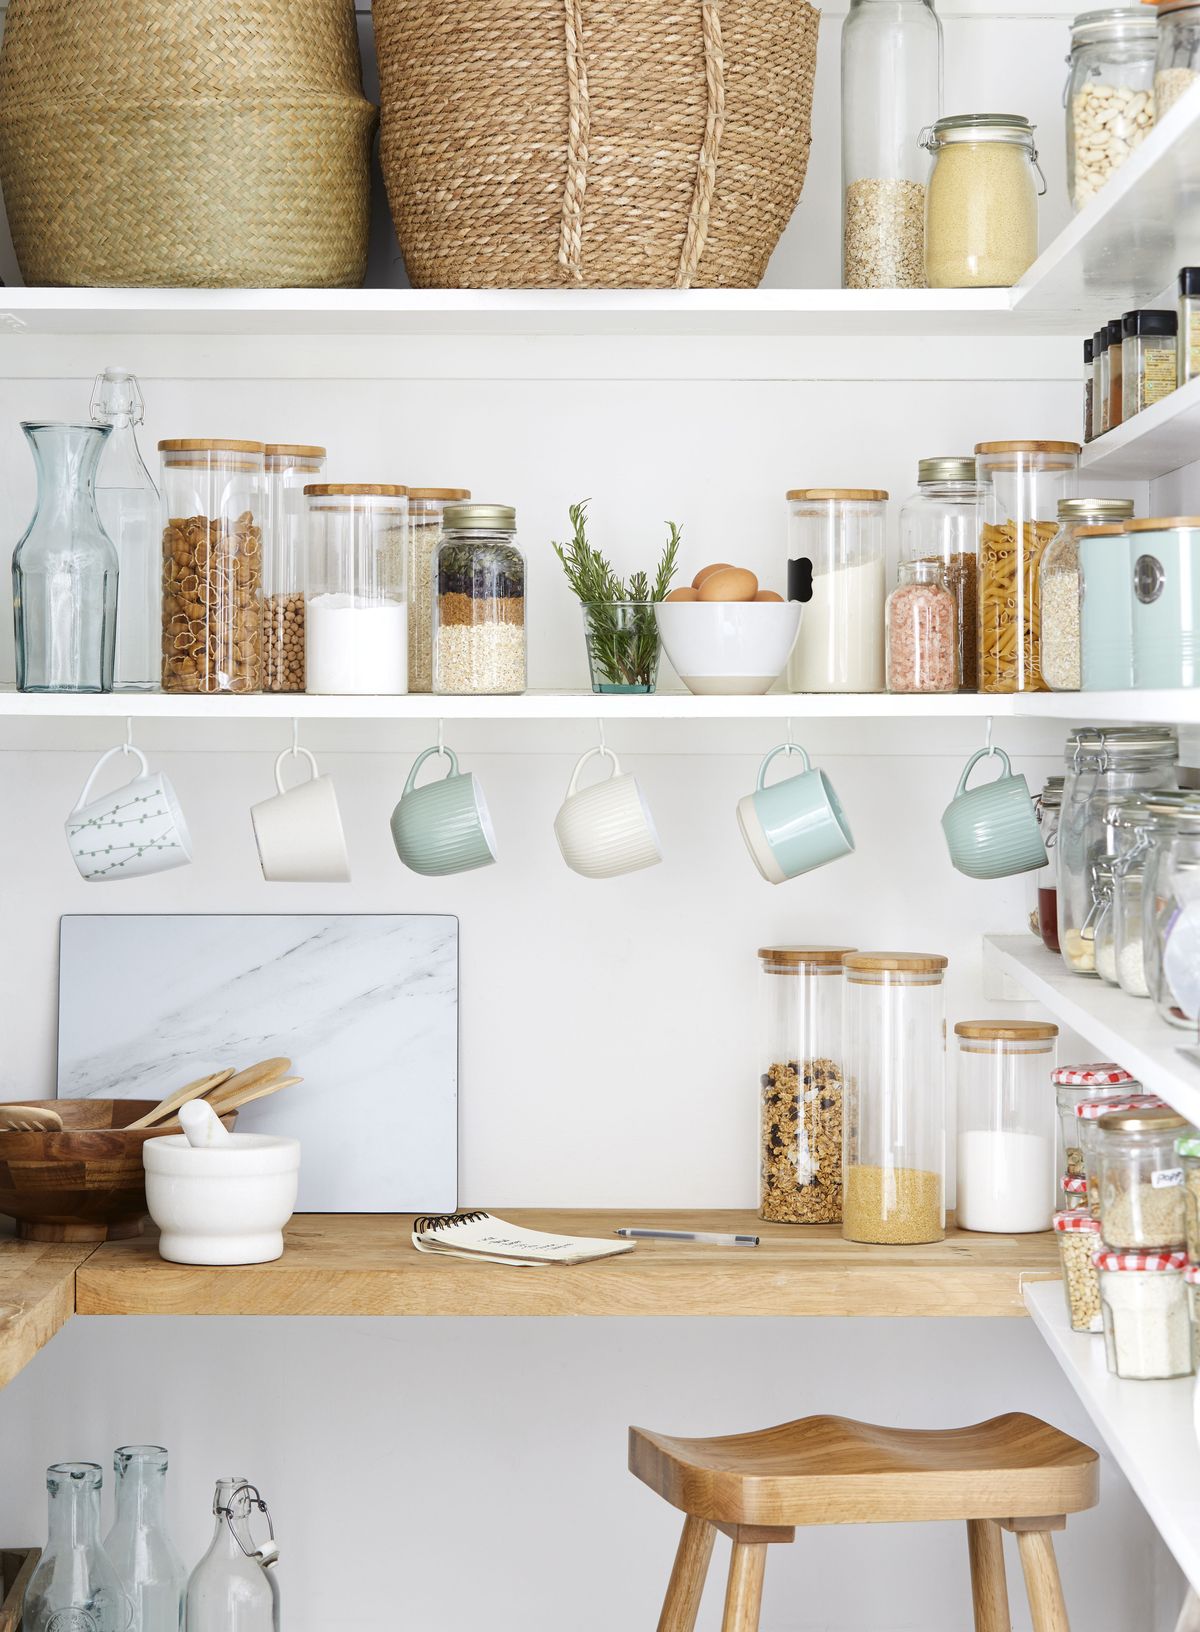 Top 5 Small Kitchen Organization Hacks For More Space